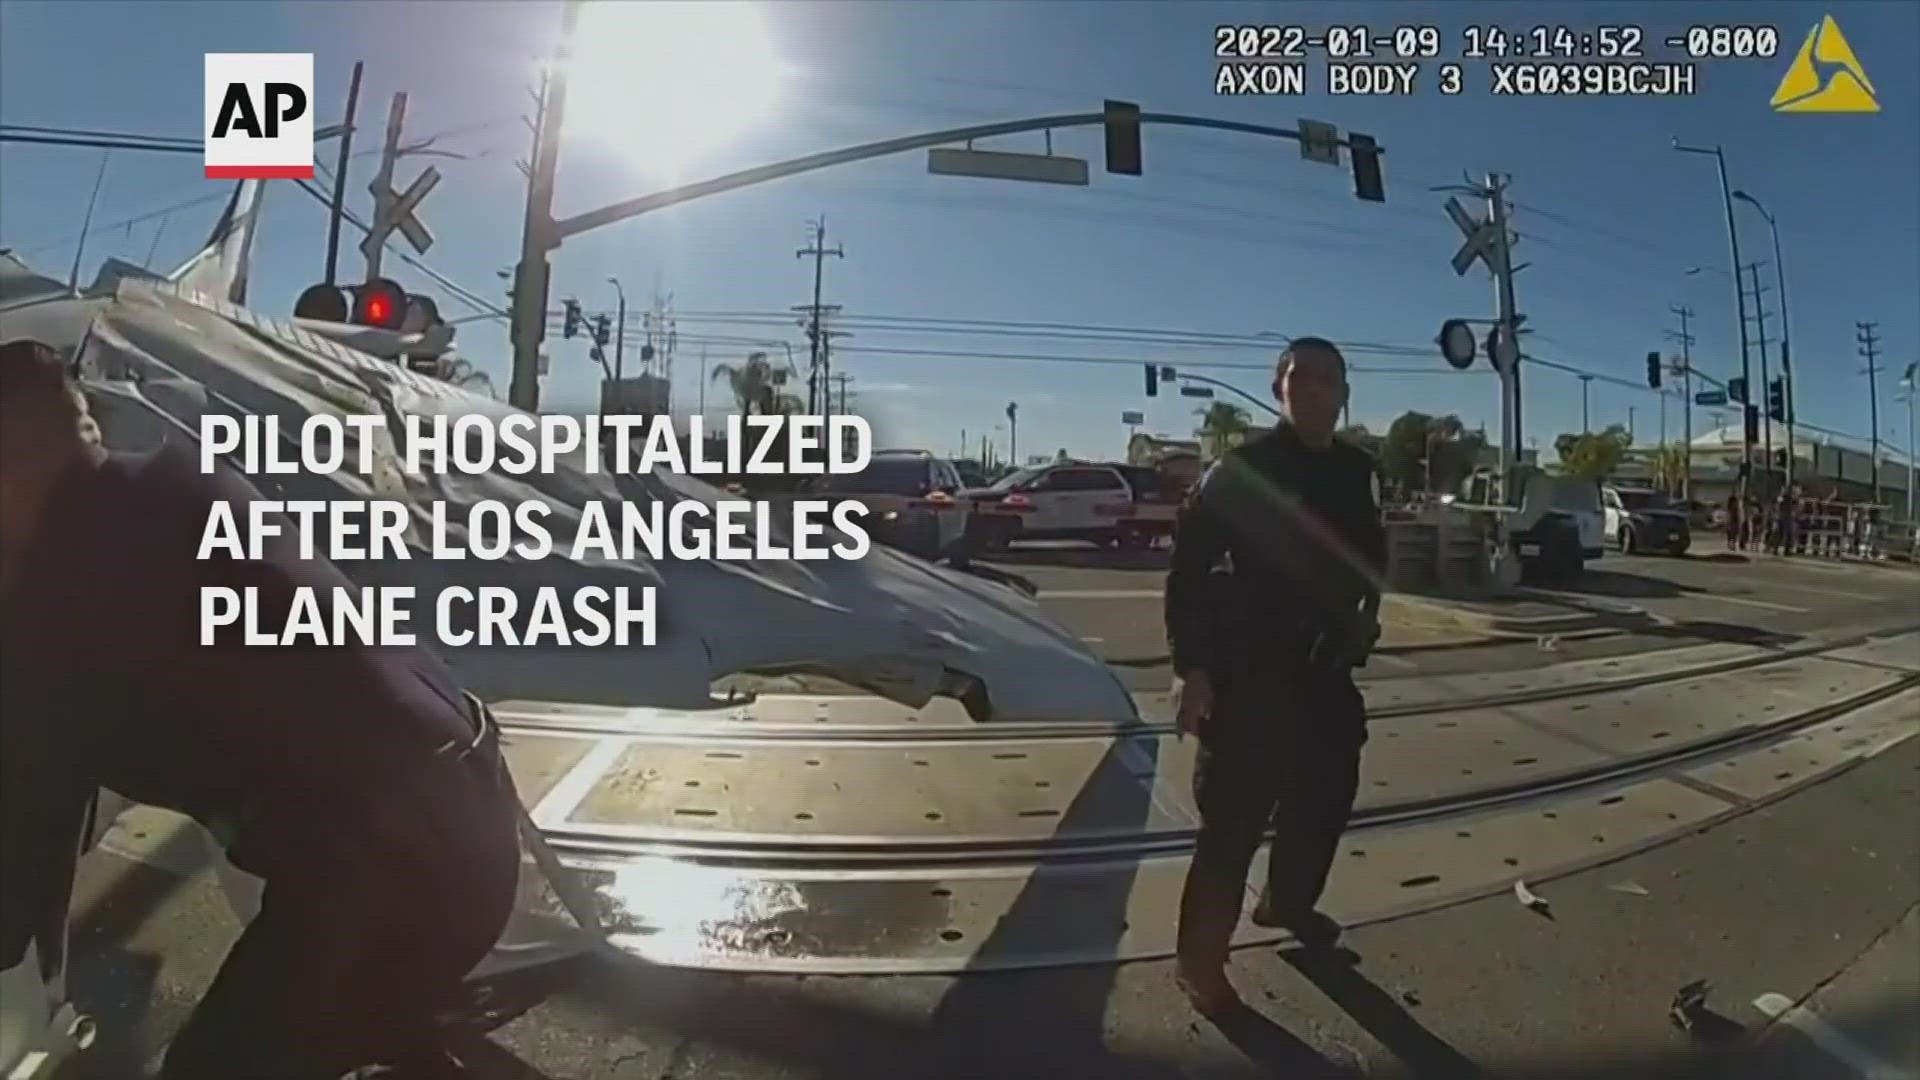 The video shows officers rescuing the pilot of a downed plane that had crashed onto train tracks near L.A.